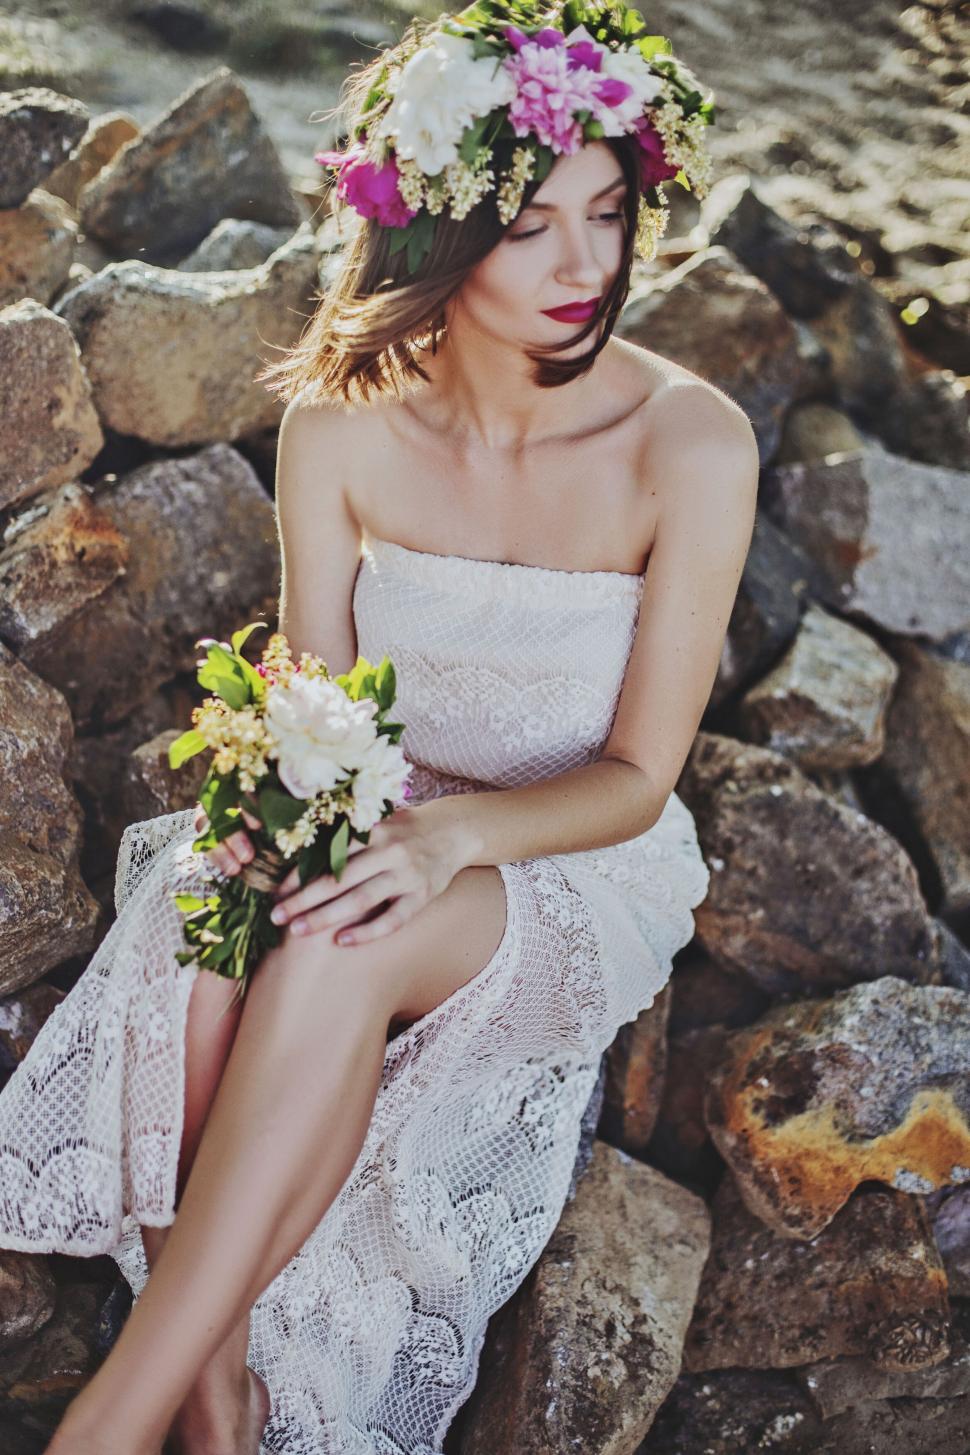 Free Image of Woman sitting on rocks with flower crown 